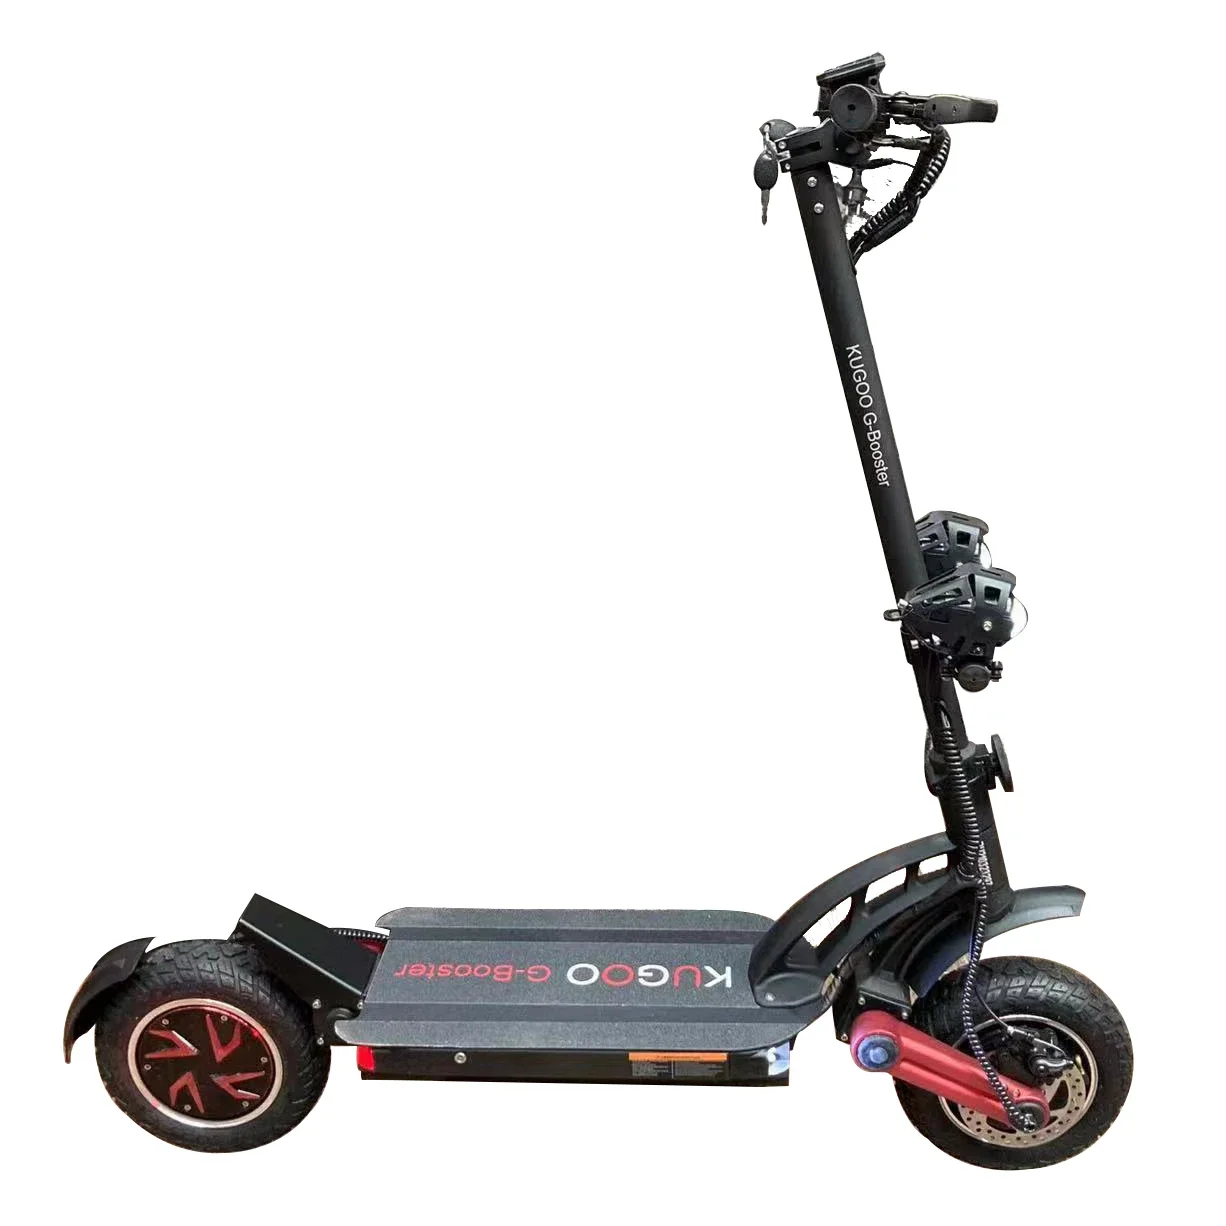 EU UK US Stock 48v 2000w Kugoo G Booster Foldable 17.5ah Longrange Folding Electric Scooters Off-road Escooter for Adult fast delivery from eu warehouse m365pro adult folding electric scooter 350w with app escooter e scooters